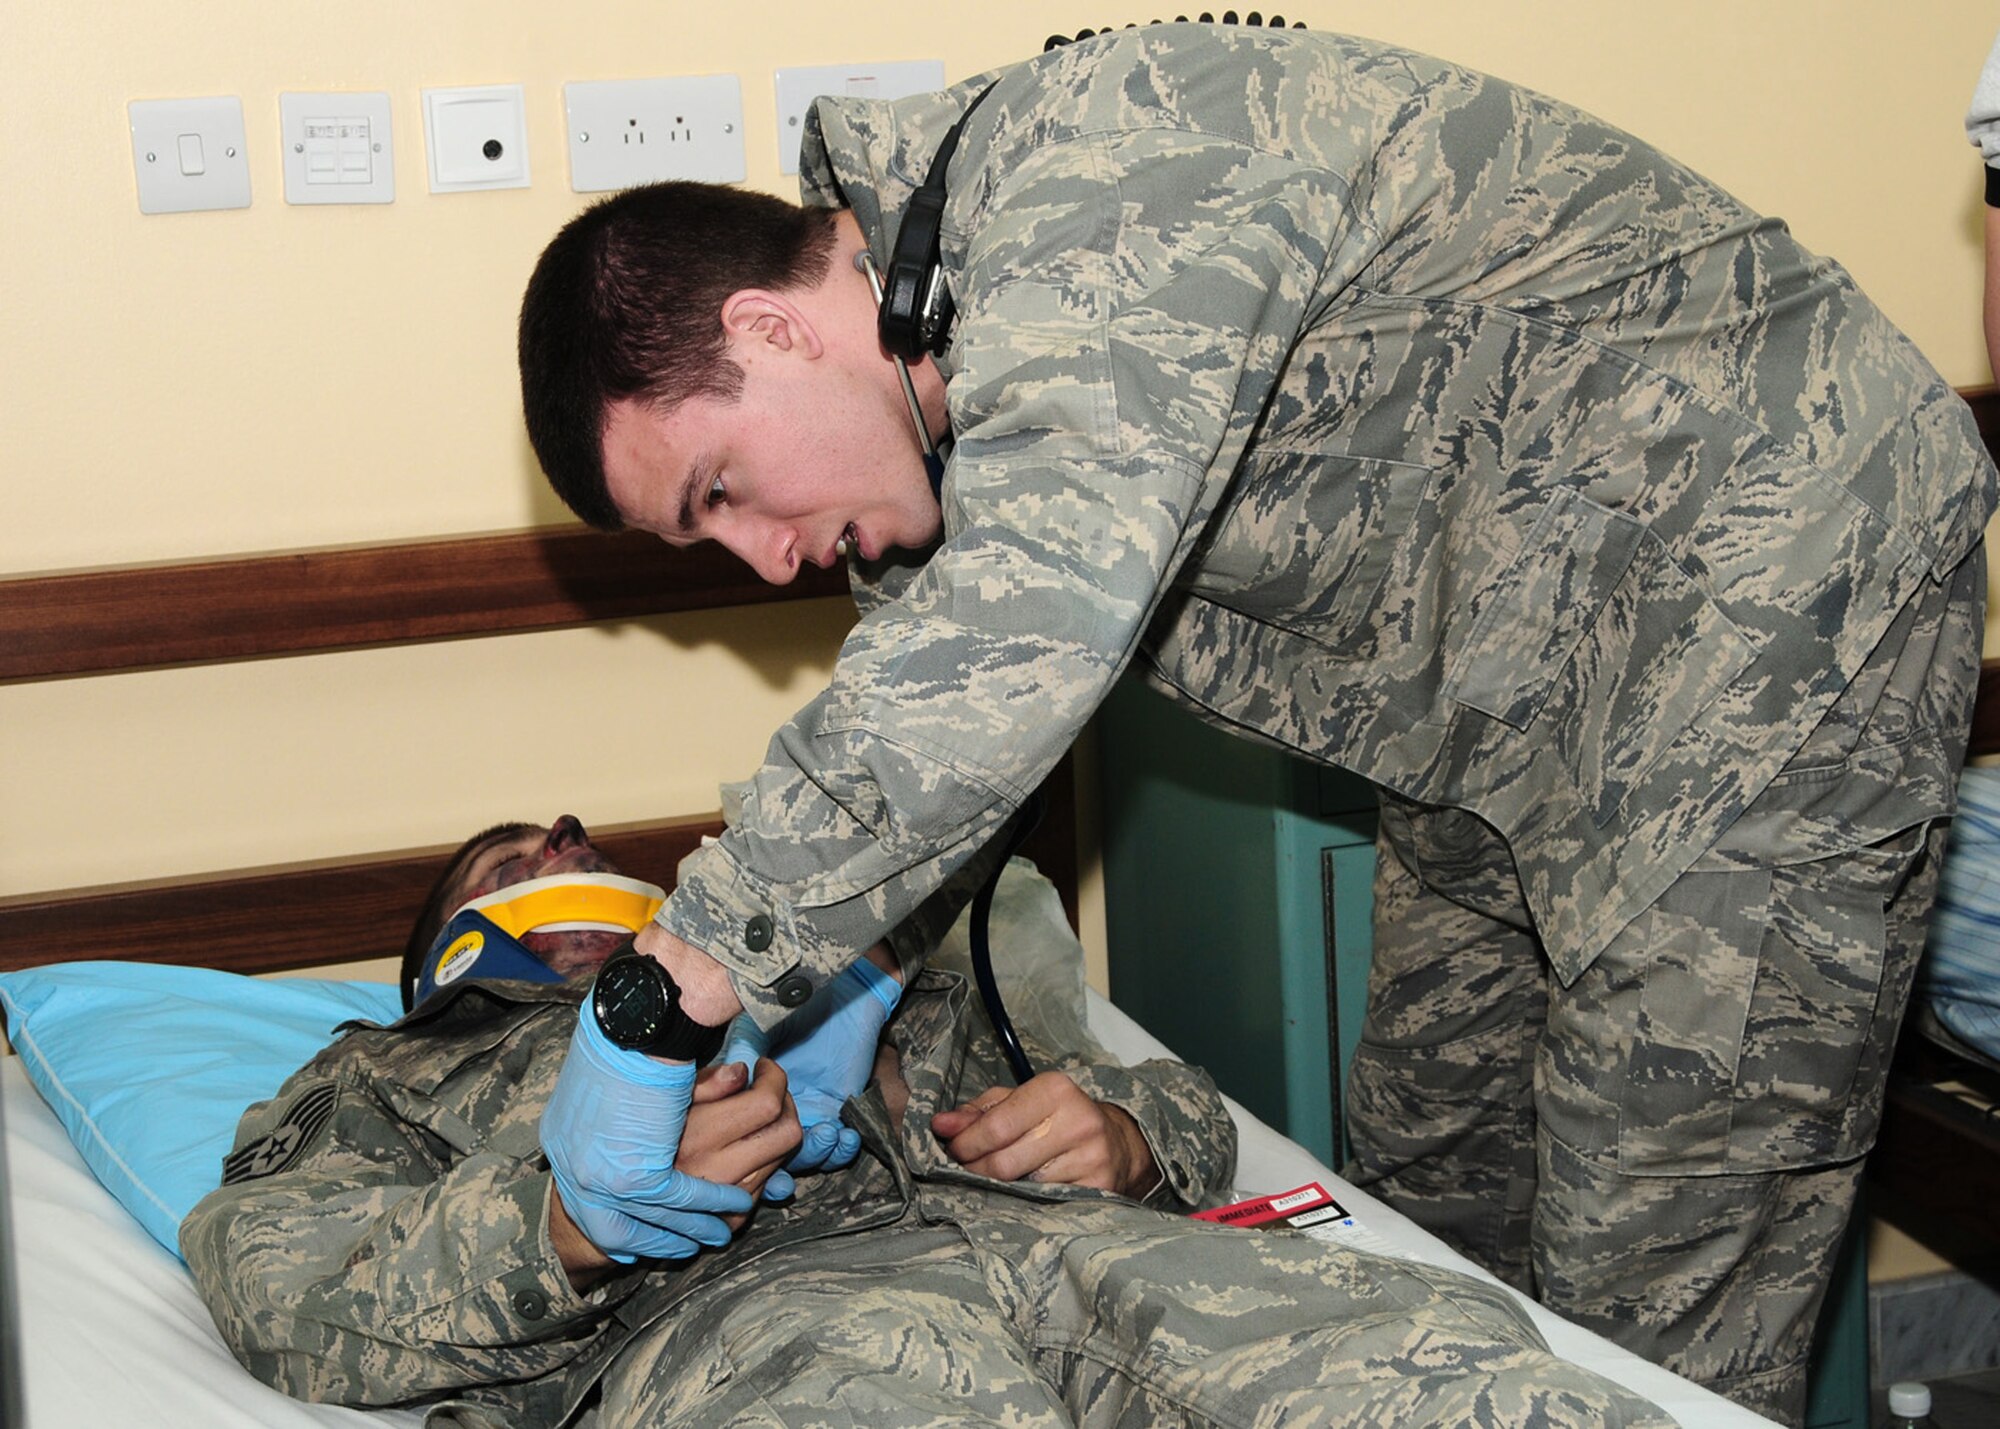 Capt. Donald Euler checks the severity of burns a "patient" received during a dorm fire exercise June 22 at an air base in Southwest Asia. Depending on the degree of severity, a burn victim may experience a wide number of potentially fatal complications including shock, infection, electrolyte imbalance and respiratory distress. Captain Euler is assigned to the 386th Expeditionary Medical Group and deployed from Wright-Patterson Air Force Base, Ohio He is a native of Chattanooga, Tenn. (U.S. Air Force photo/Senior Airman Courtney Richardson)